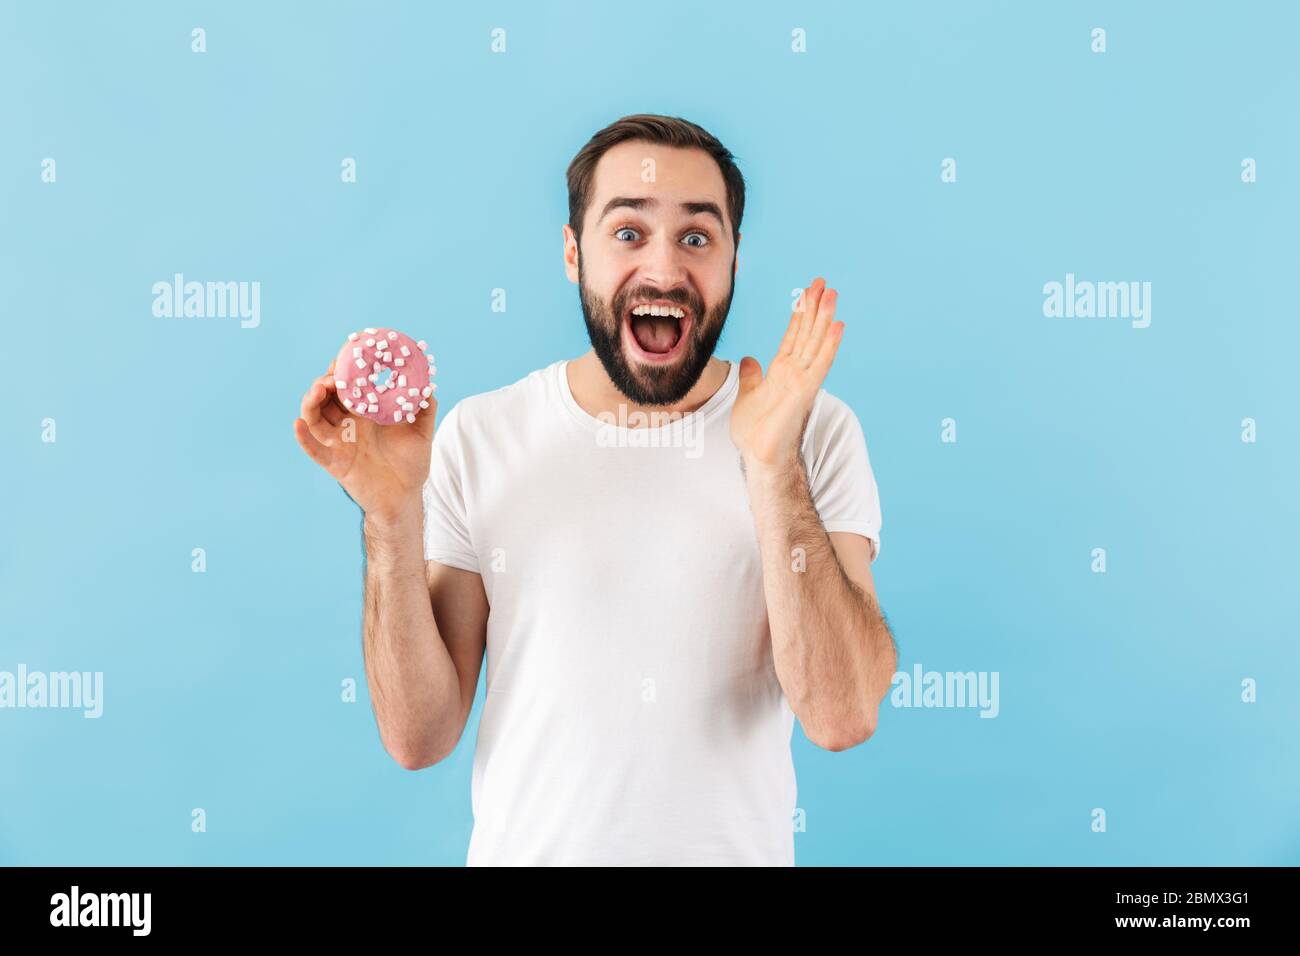 Image of young emotional excited man isolated over blue wall background holding donut. Stock Photo